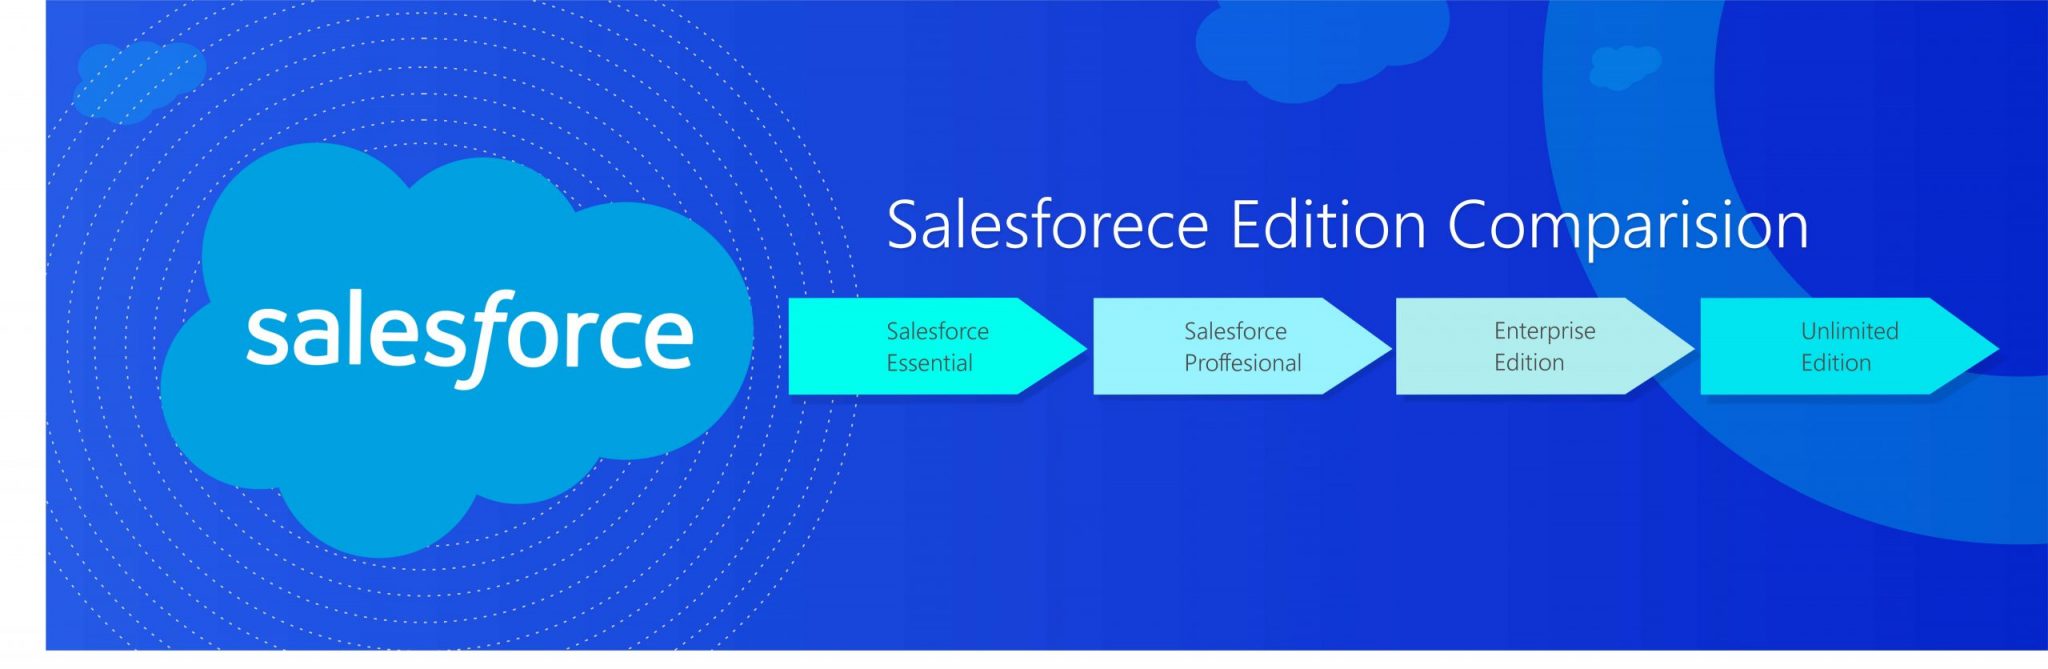 Salesforce-Edition-Comparision-scaled-1-2048x669